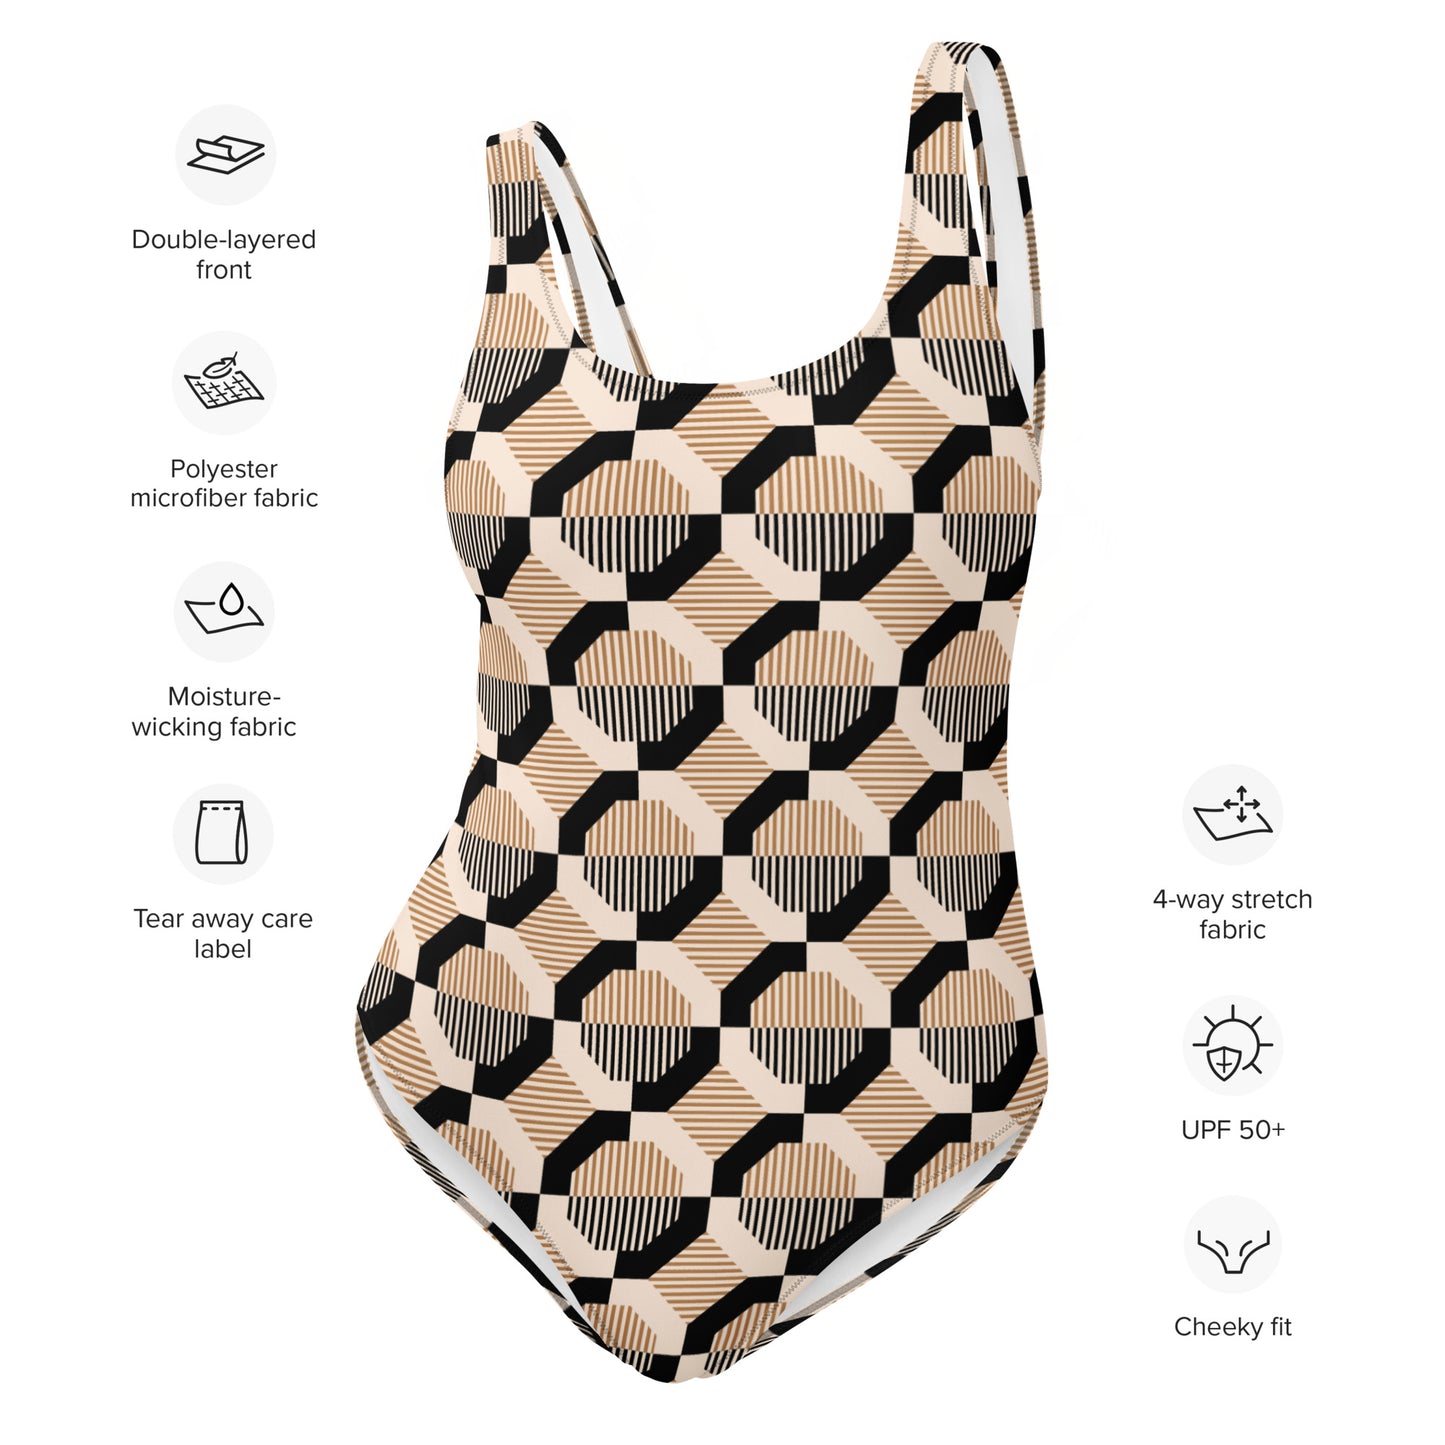 #TheHellIWont - One-Piece Swimsuit